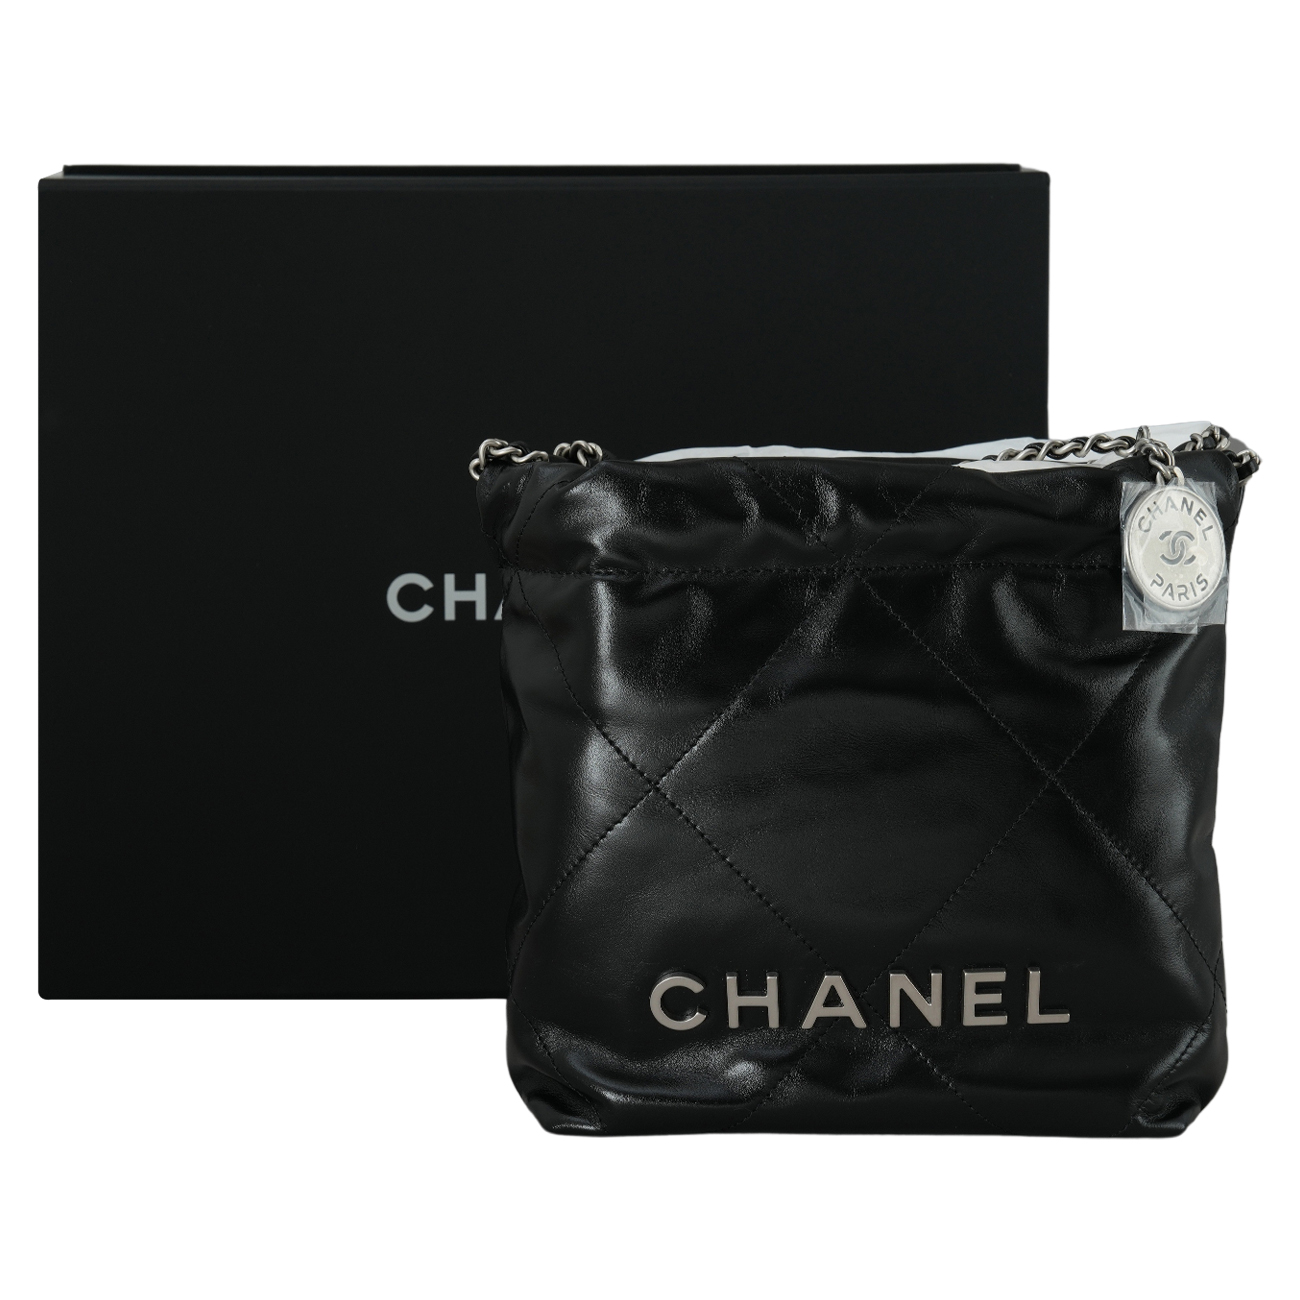 CHANEL(NEW)샤넬 AS3980 22 미니 호보백 (새상품) NEW PRODUCT